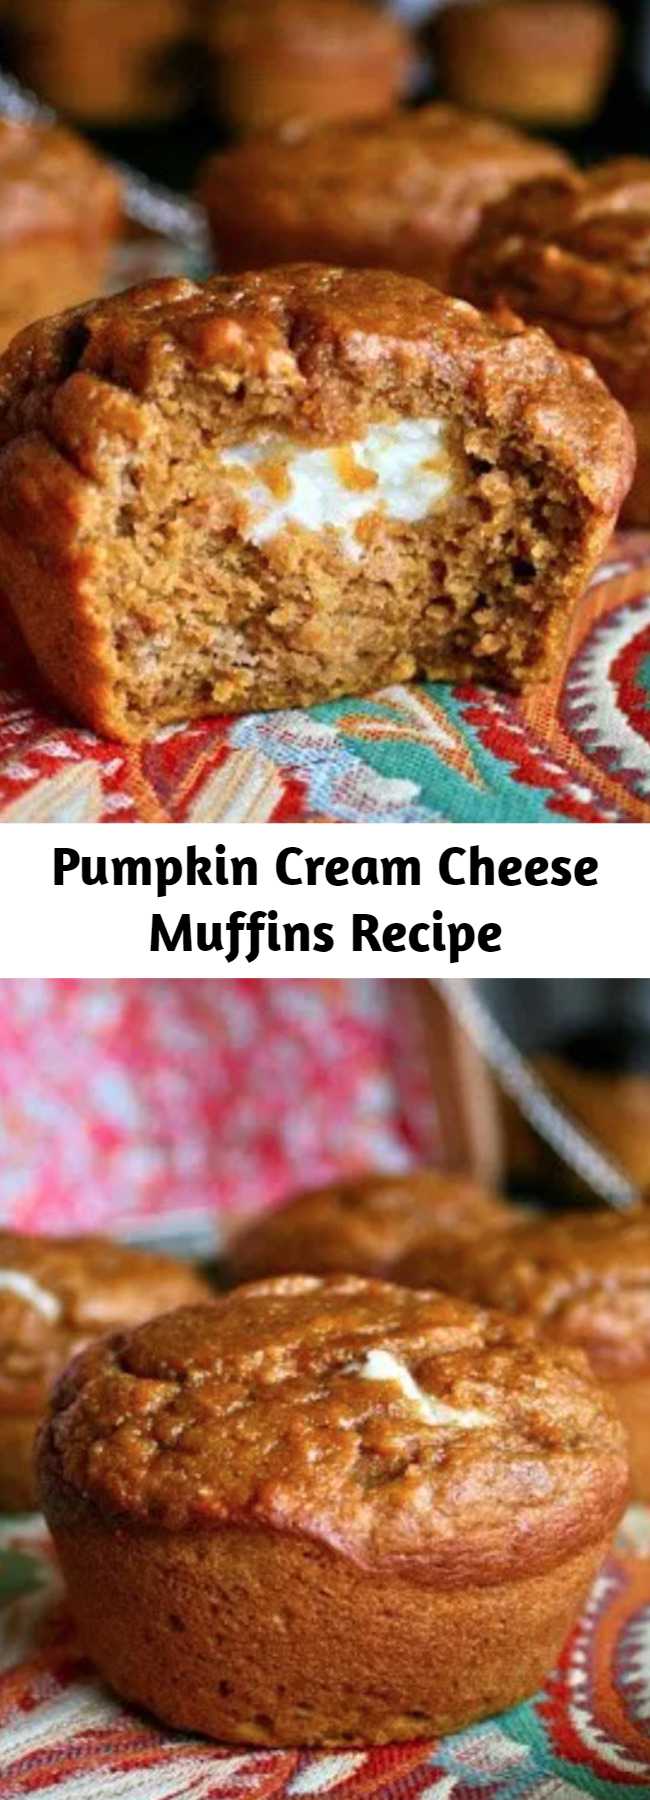 Pumpkin Cream Cheese Muffins Recipe - These Pumpkin Cream Cheese Muffins are a perfect Starbucks knock off and they are sure to satisfy all your pumpkin dreams. It's amazingly light, moist, and flavorful so I will definitely be keeping this recipe for my go to pumpkin bread/muffin. In my opinion, these are best served slightly warmed and with a cup of hot coffee, which actually sounds pretty great right now. 🙂 Enjoy!